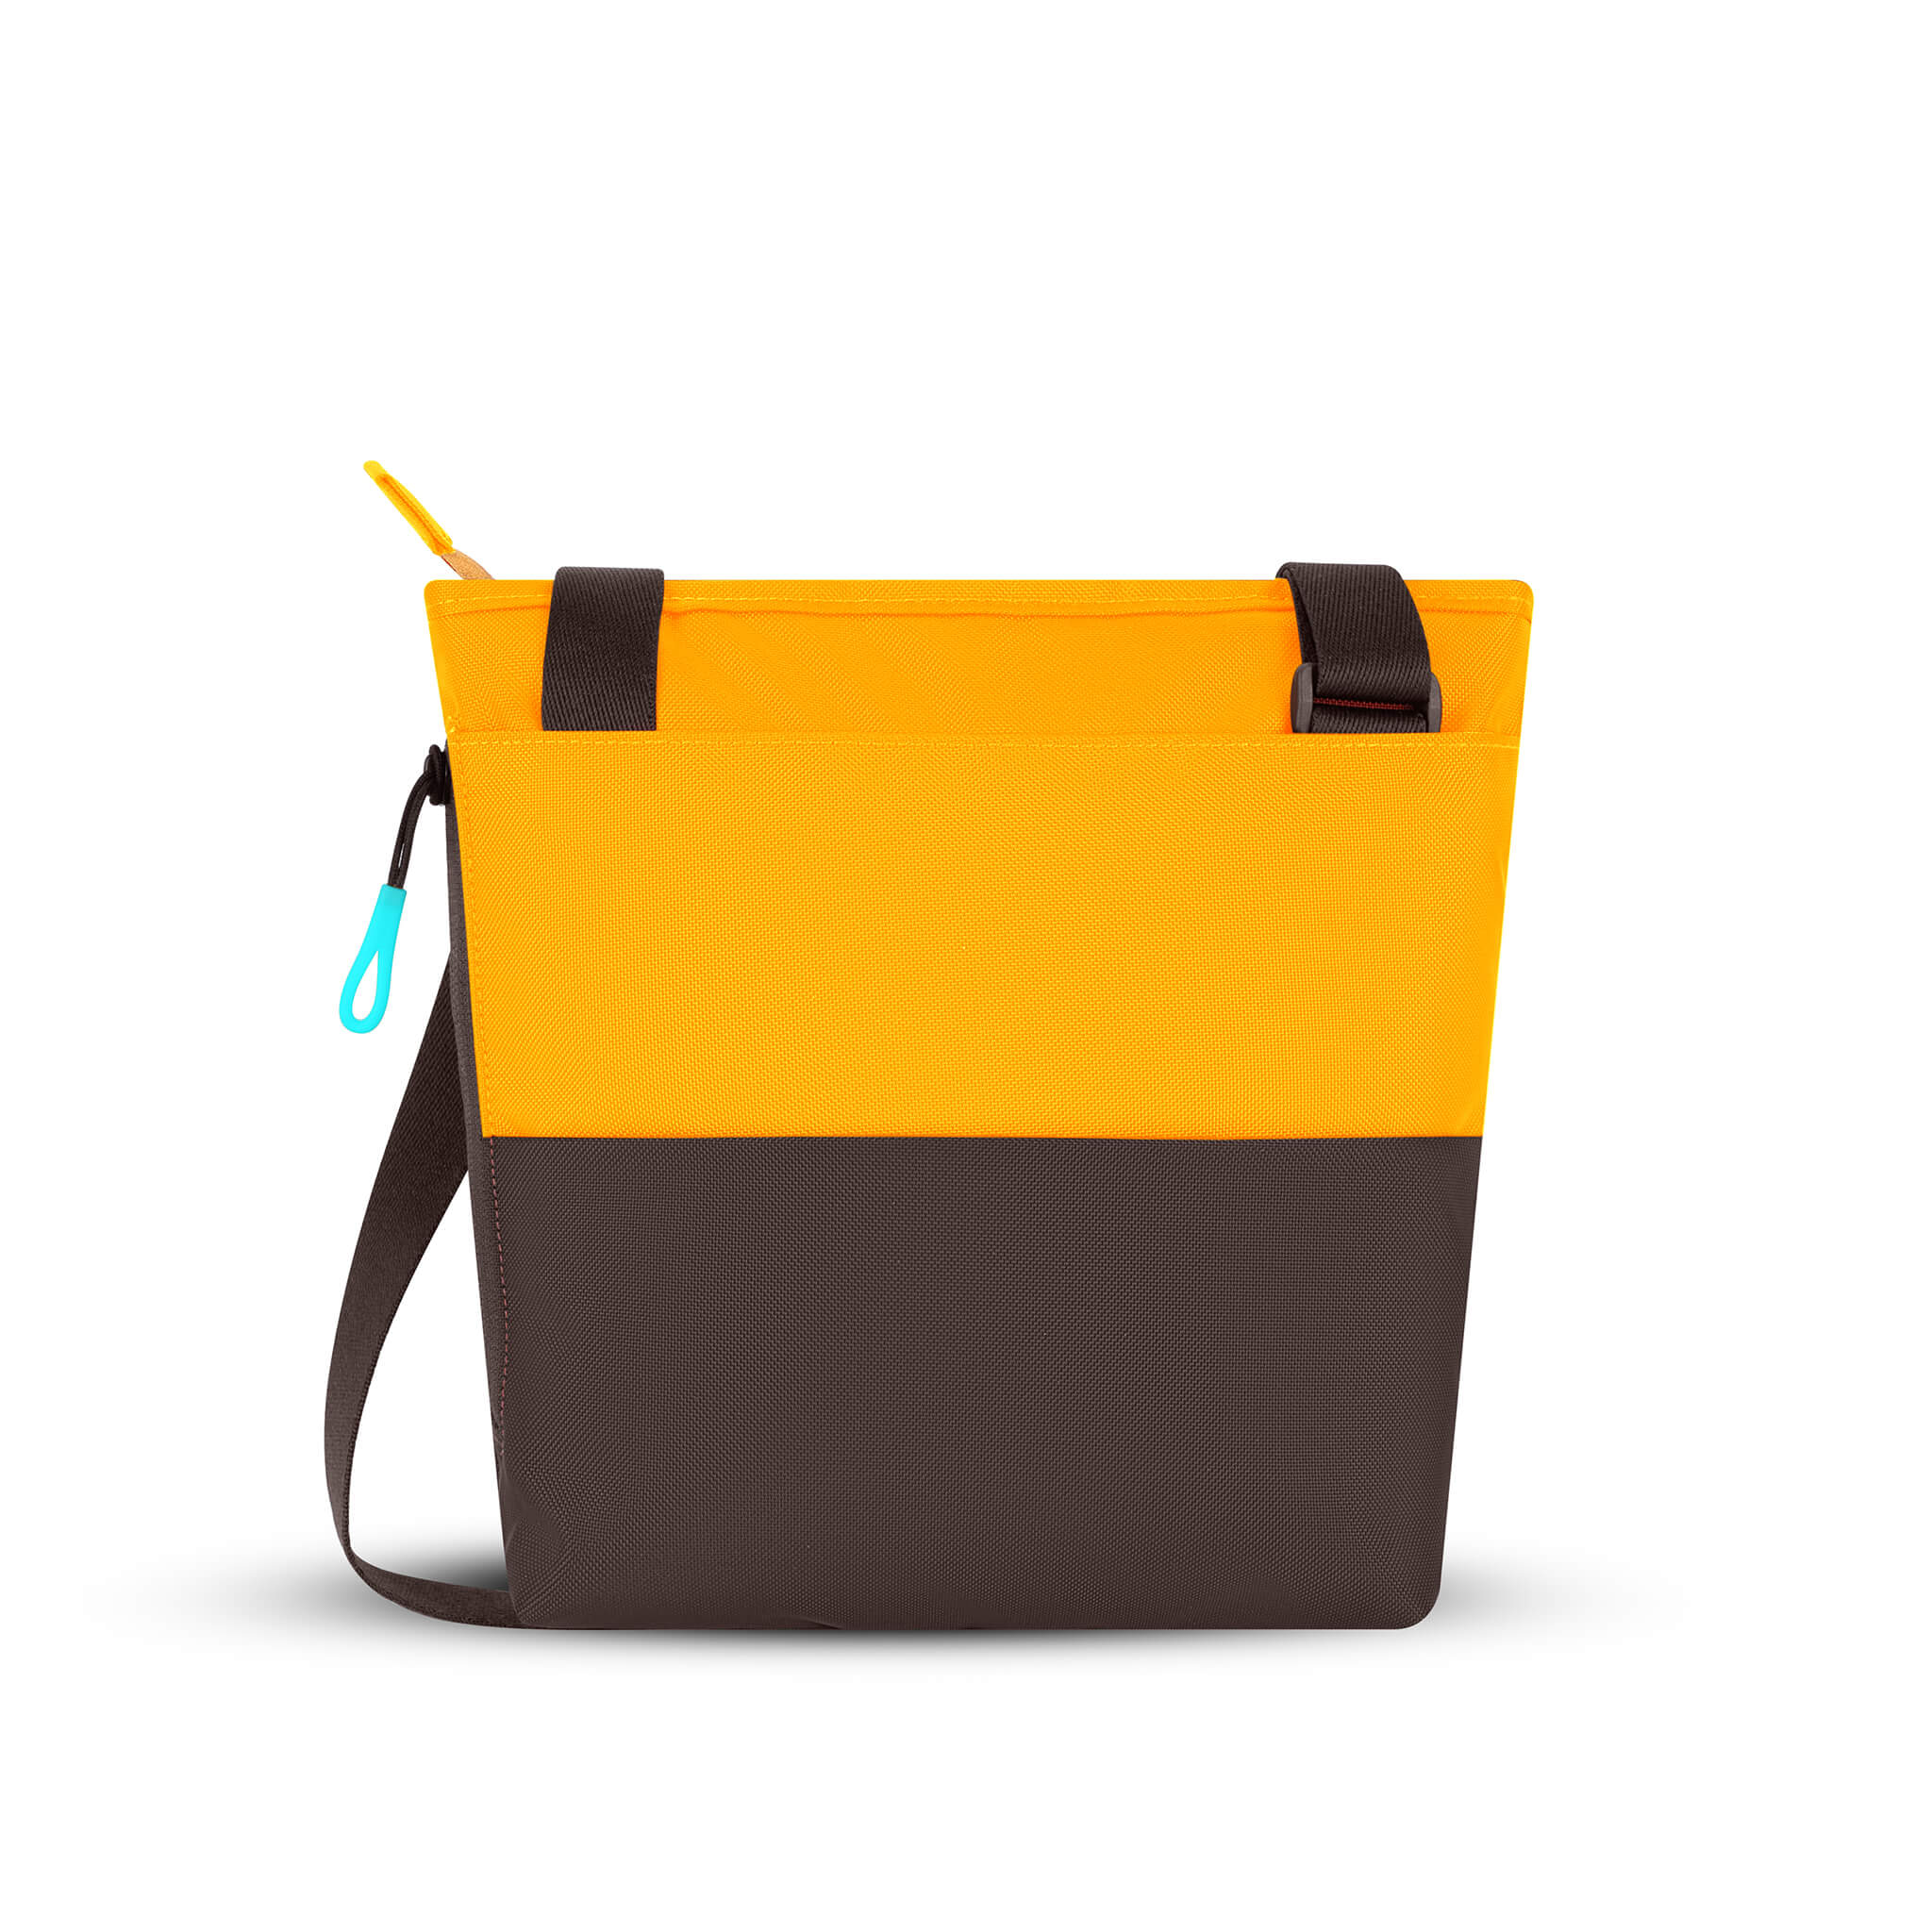 Back view of Sherpani crossbody travel bag, the Sadie in Sundial. Sadie features include two front zipper pockets, a discrete side pocket, detachable keychain, adjustable crossbody strap, back slip pocket and RFID blocking technology. The Sundial color is two-toned in yellow and dark brown with turquoise accents.